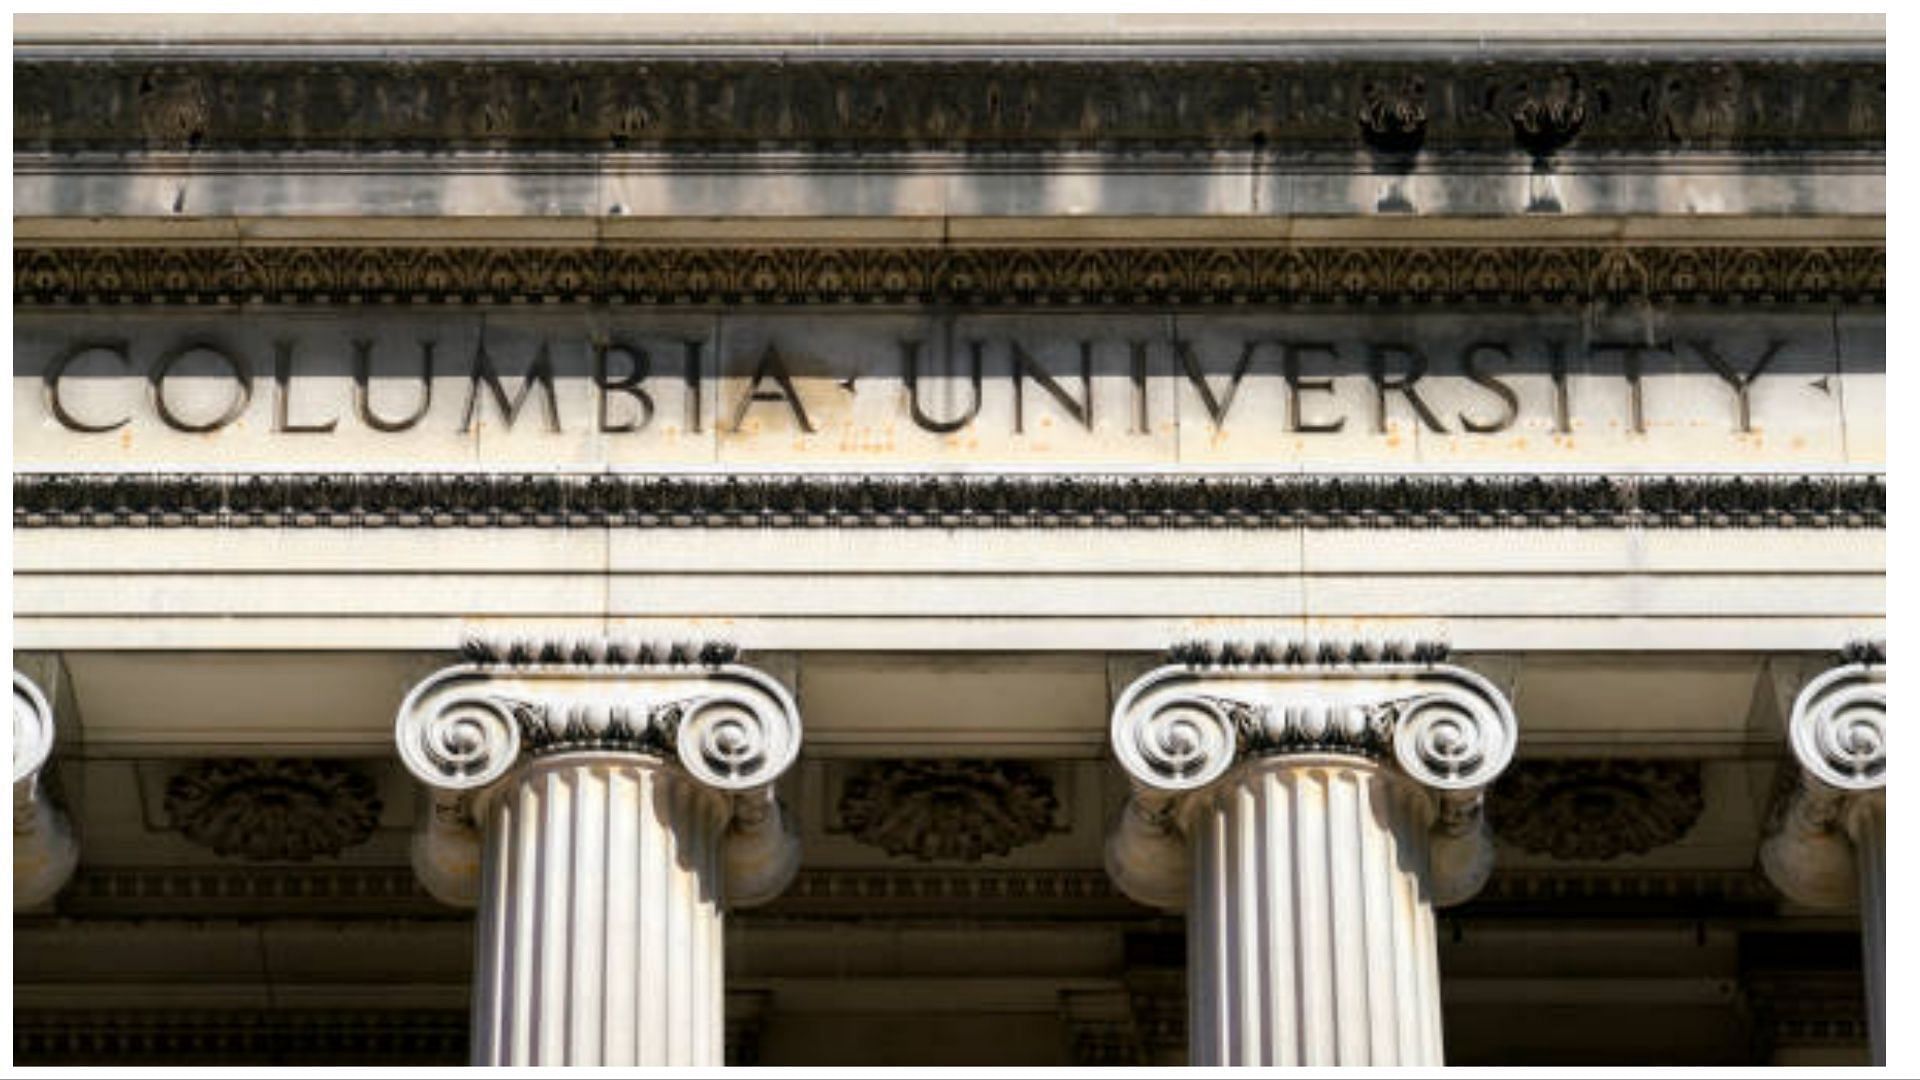 62-year-old woman gets stabbed inside Columbia University campus (Image via Getty)